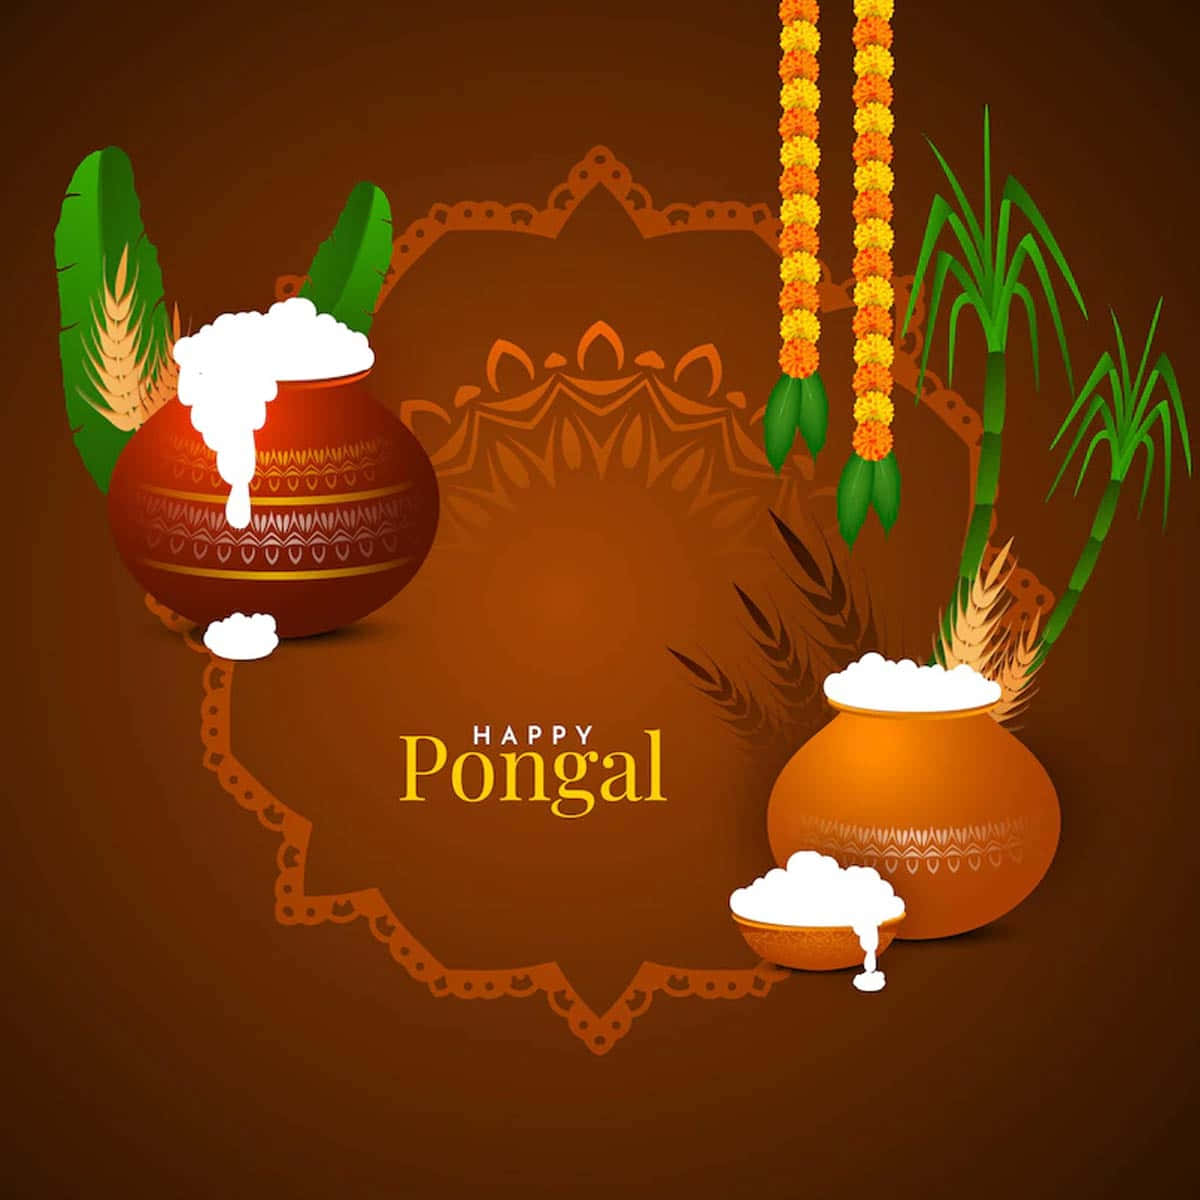 Celebrate the colorful Pongal festival with love and happiness